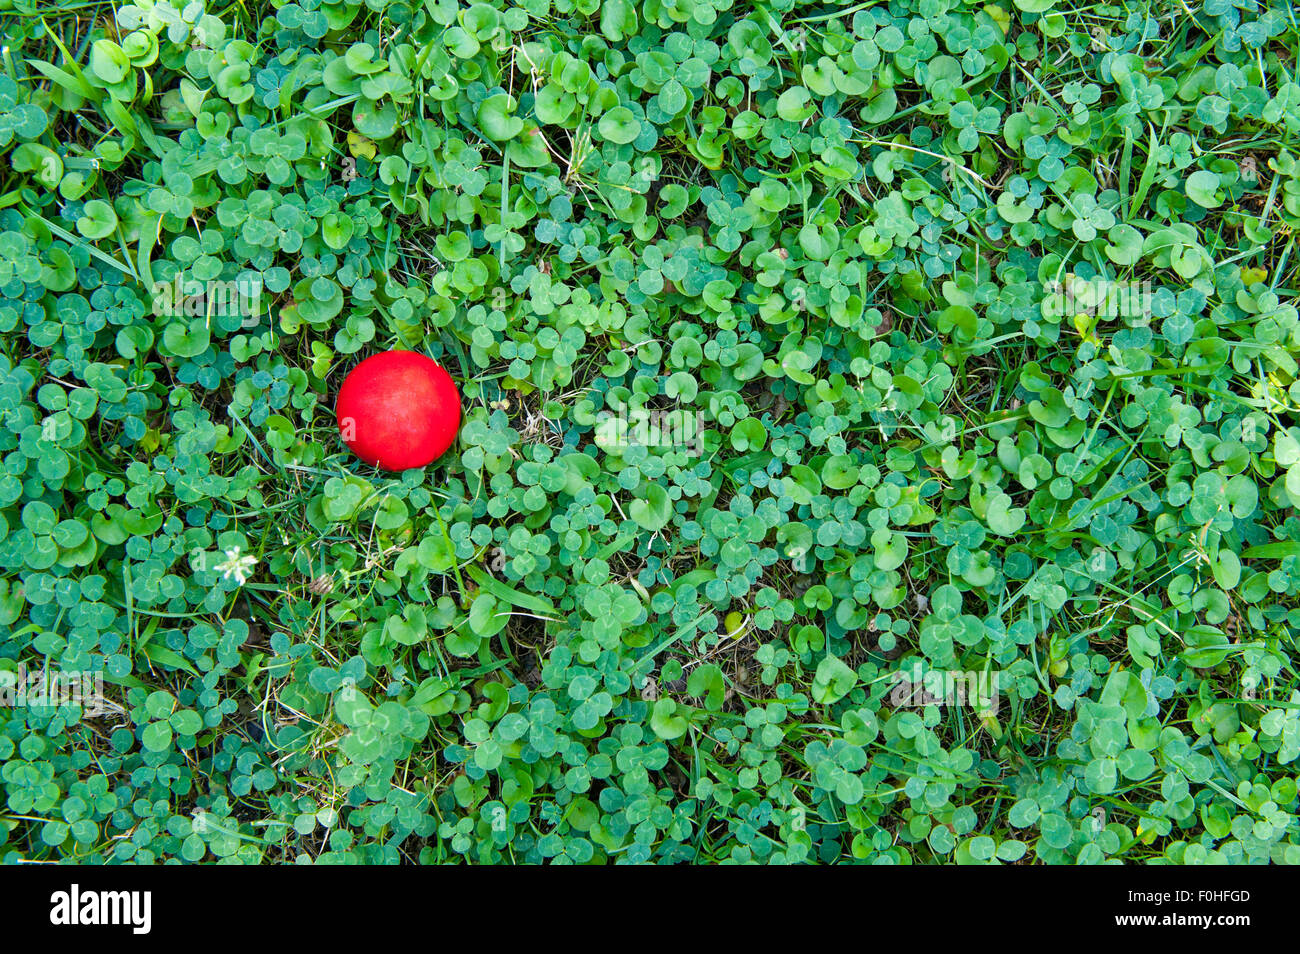 Clover natural field green texture with a red ball on left side, horizontal Stock Photo